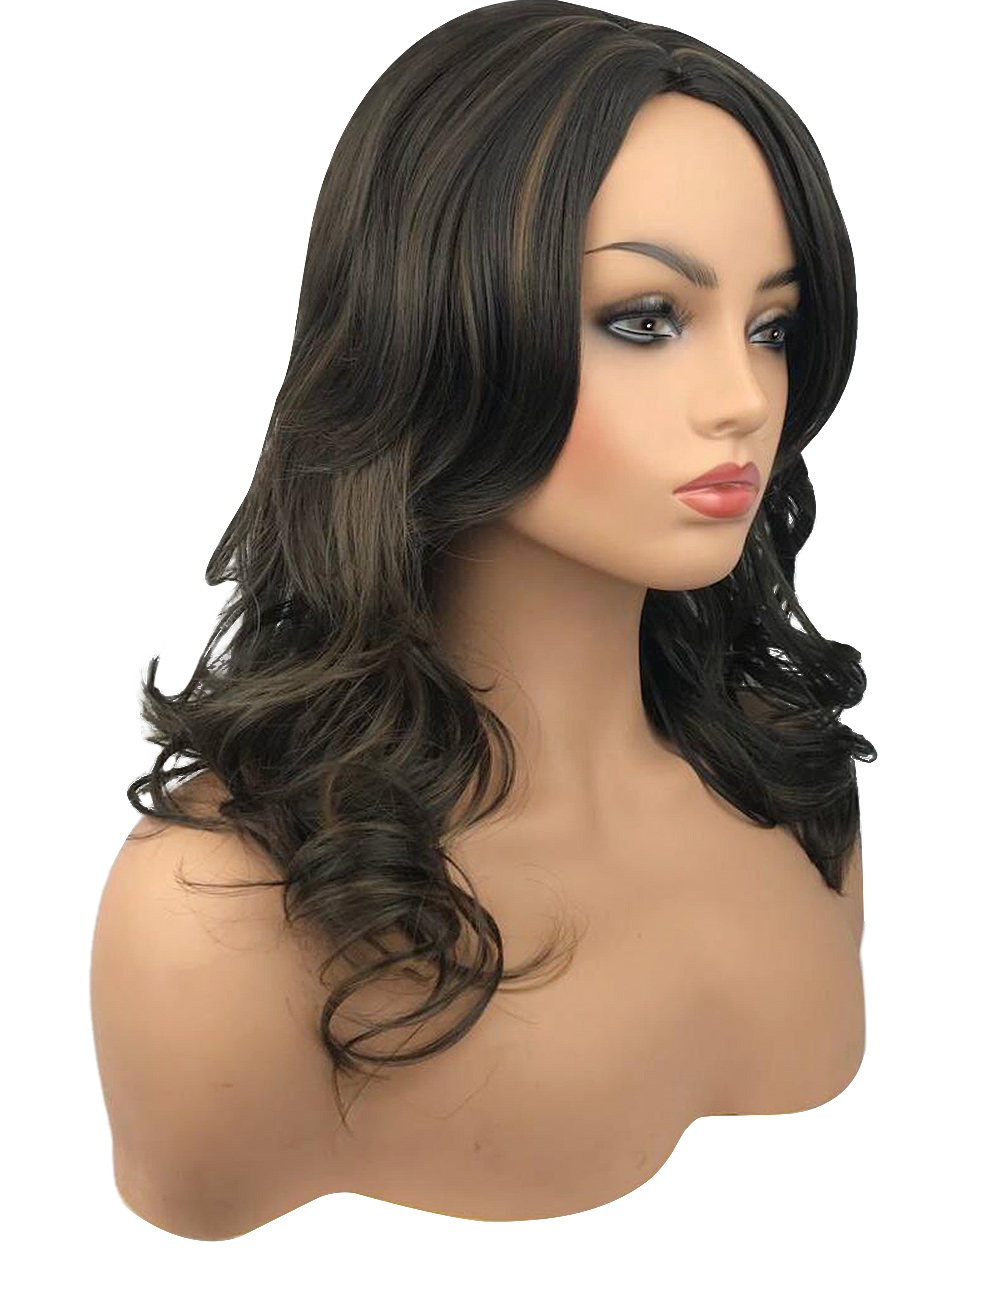 Ericdress Women's Medium Bob Hairstyles Wavy Synthetic Hair Wigs 16 Inches